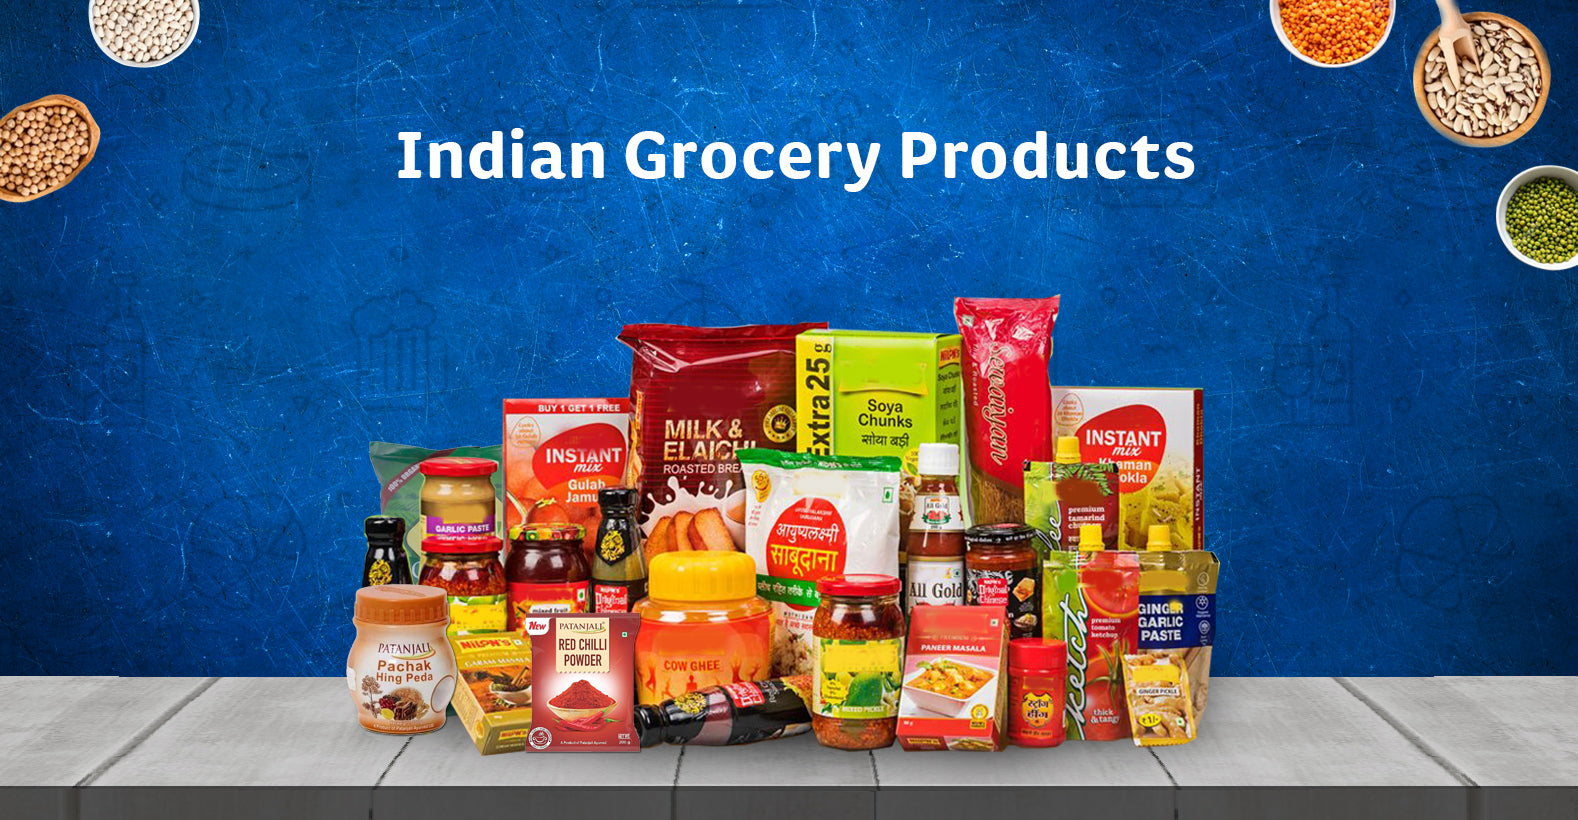 Indian Grocery Products Online